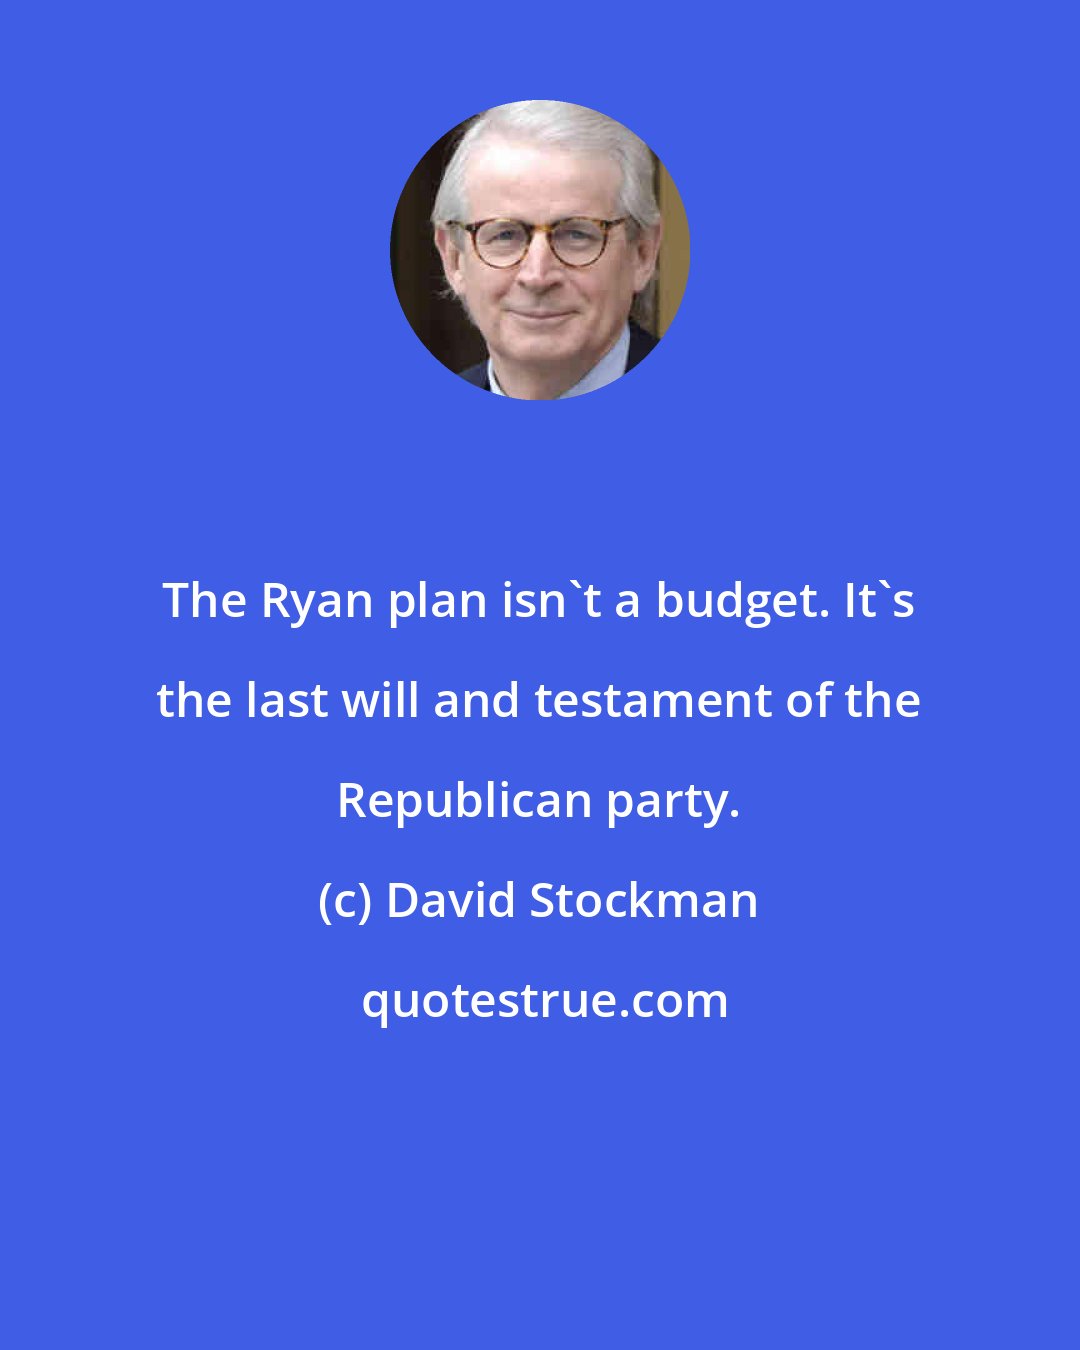 David Stockman: The Ryan plan isn't a budget. It's the last will and testament of the Republican party.